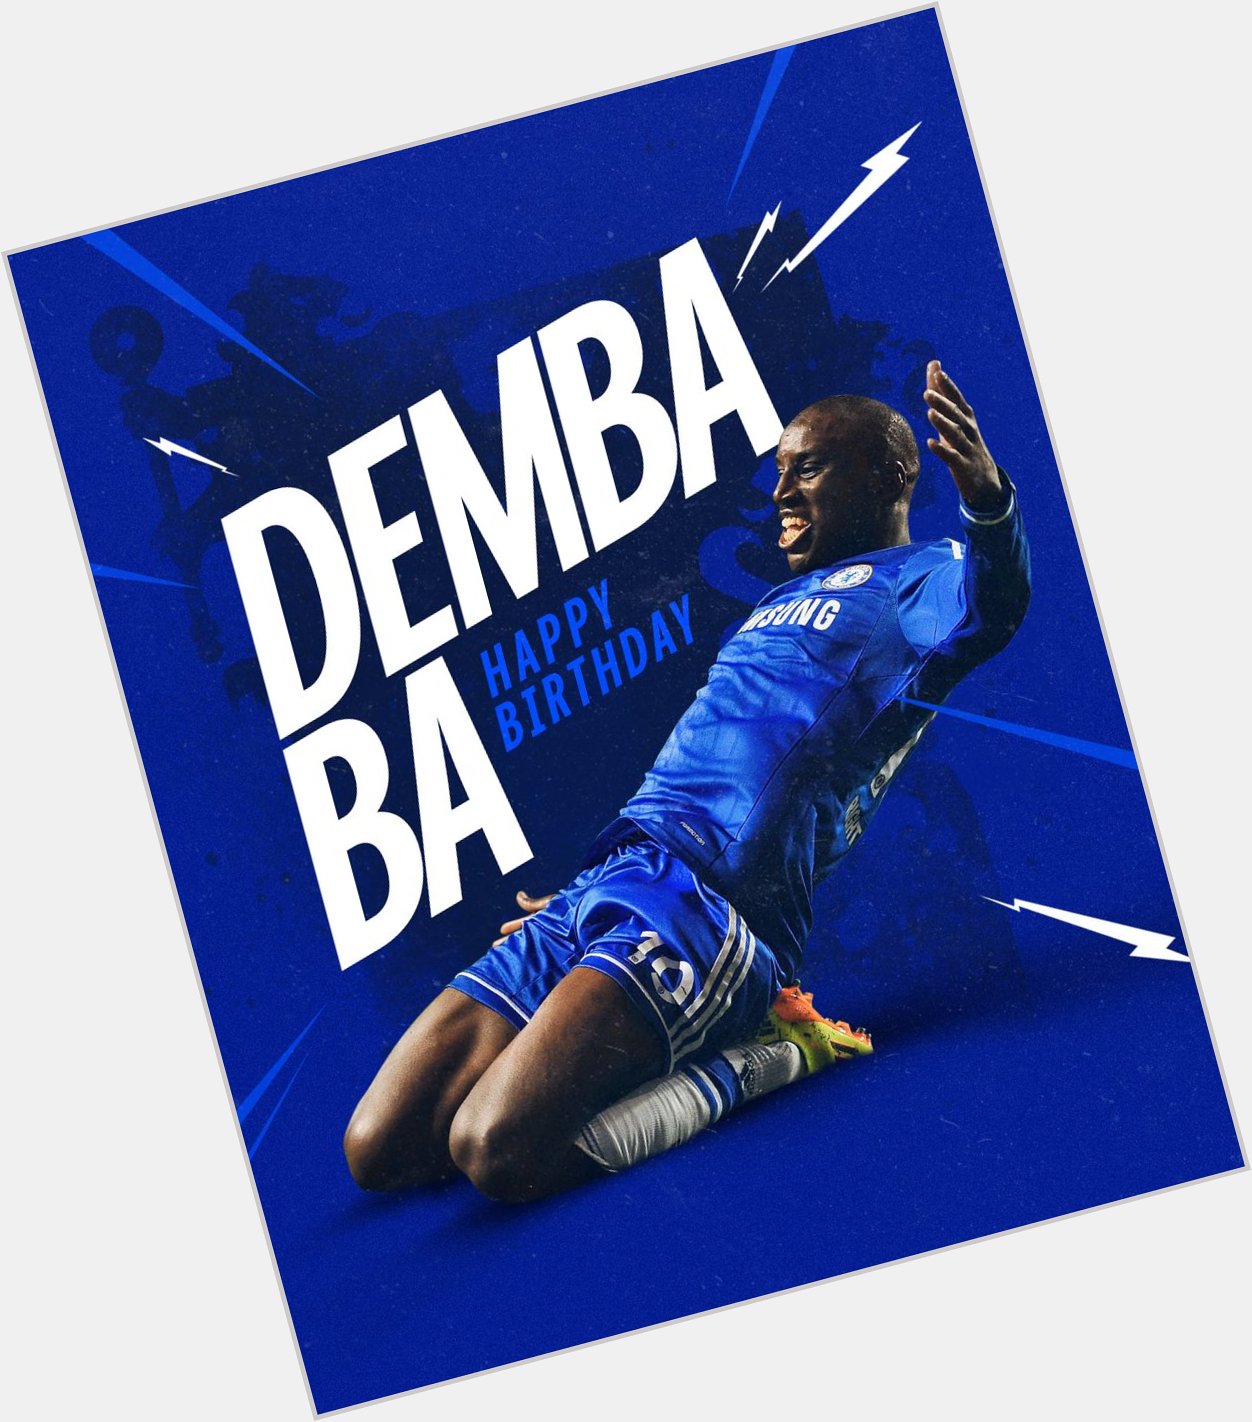 Happy birthday   to one of the Blues striker in history.
Demba Ba    